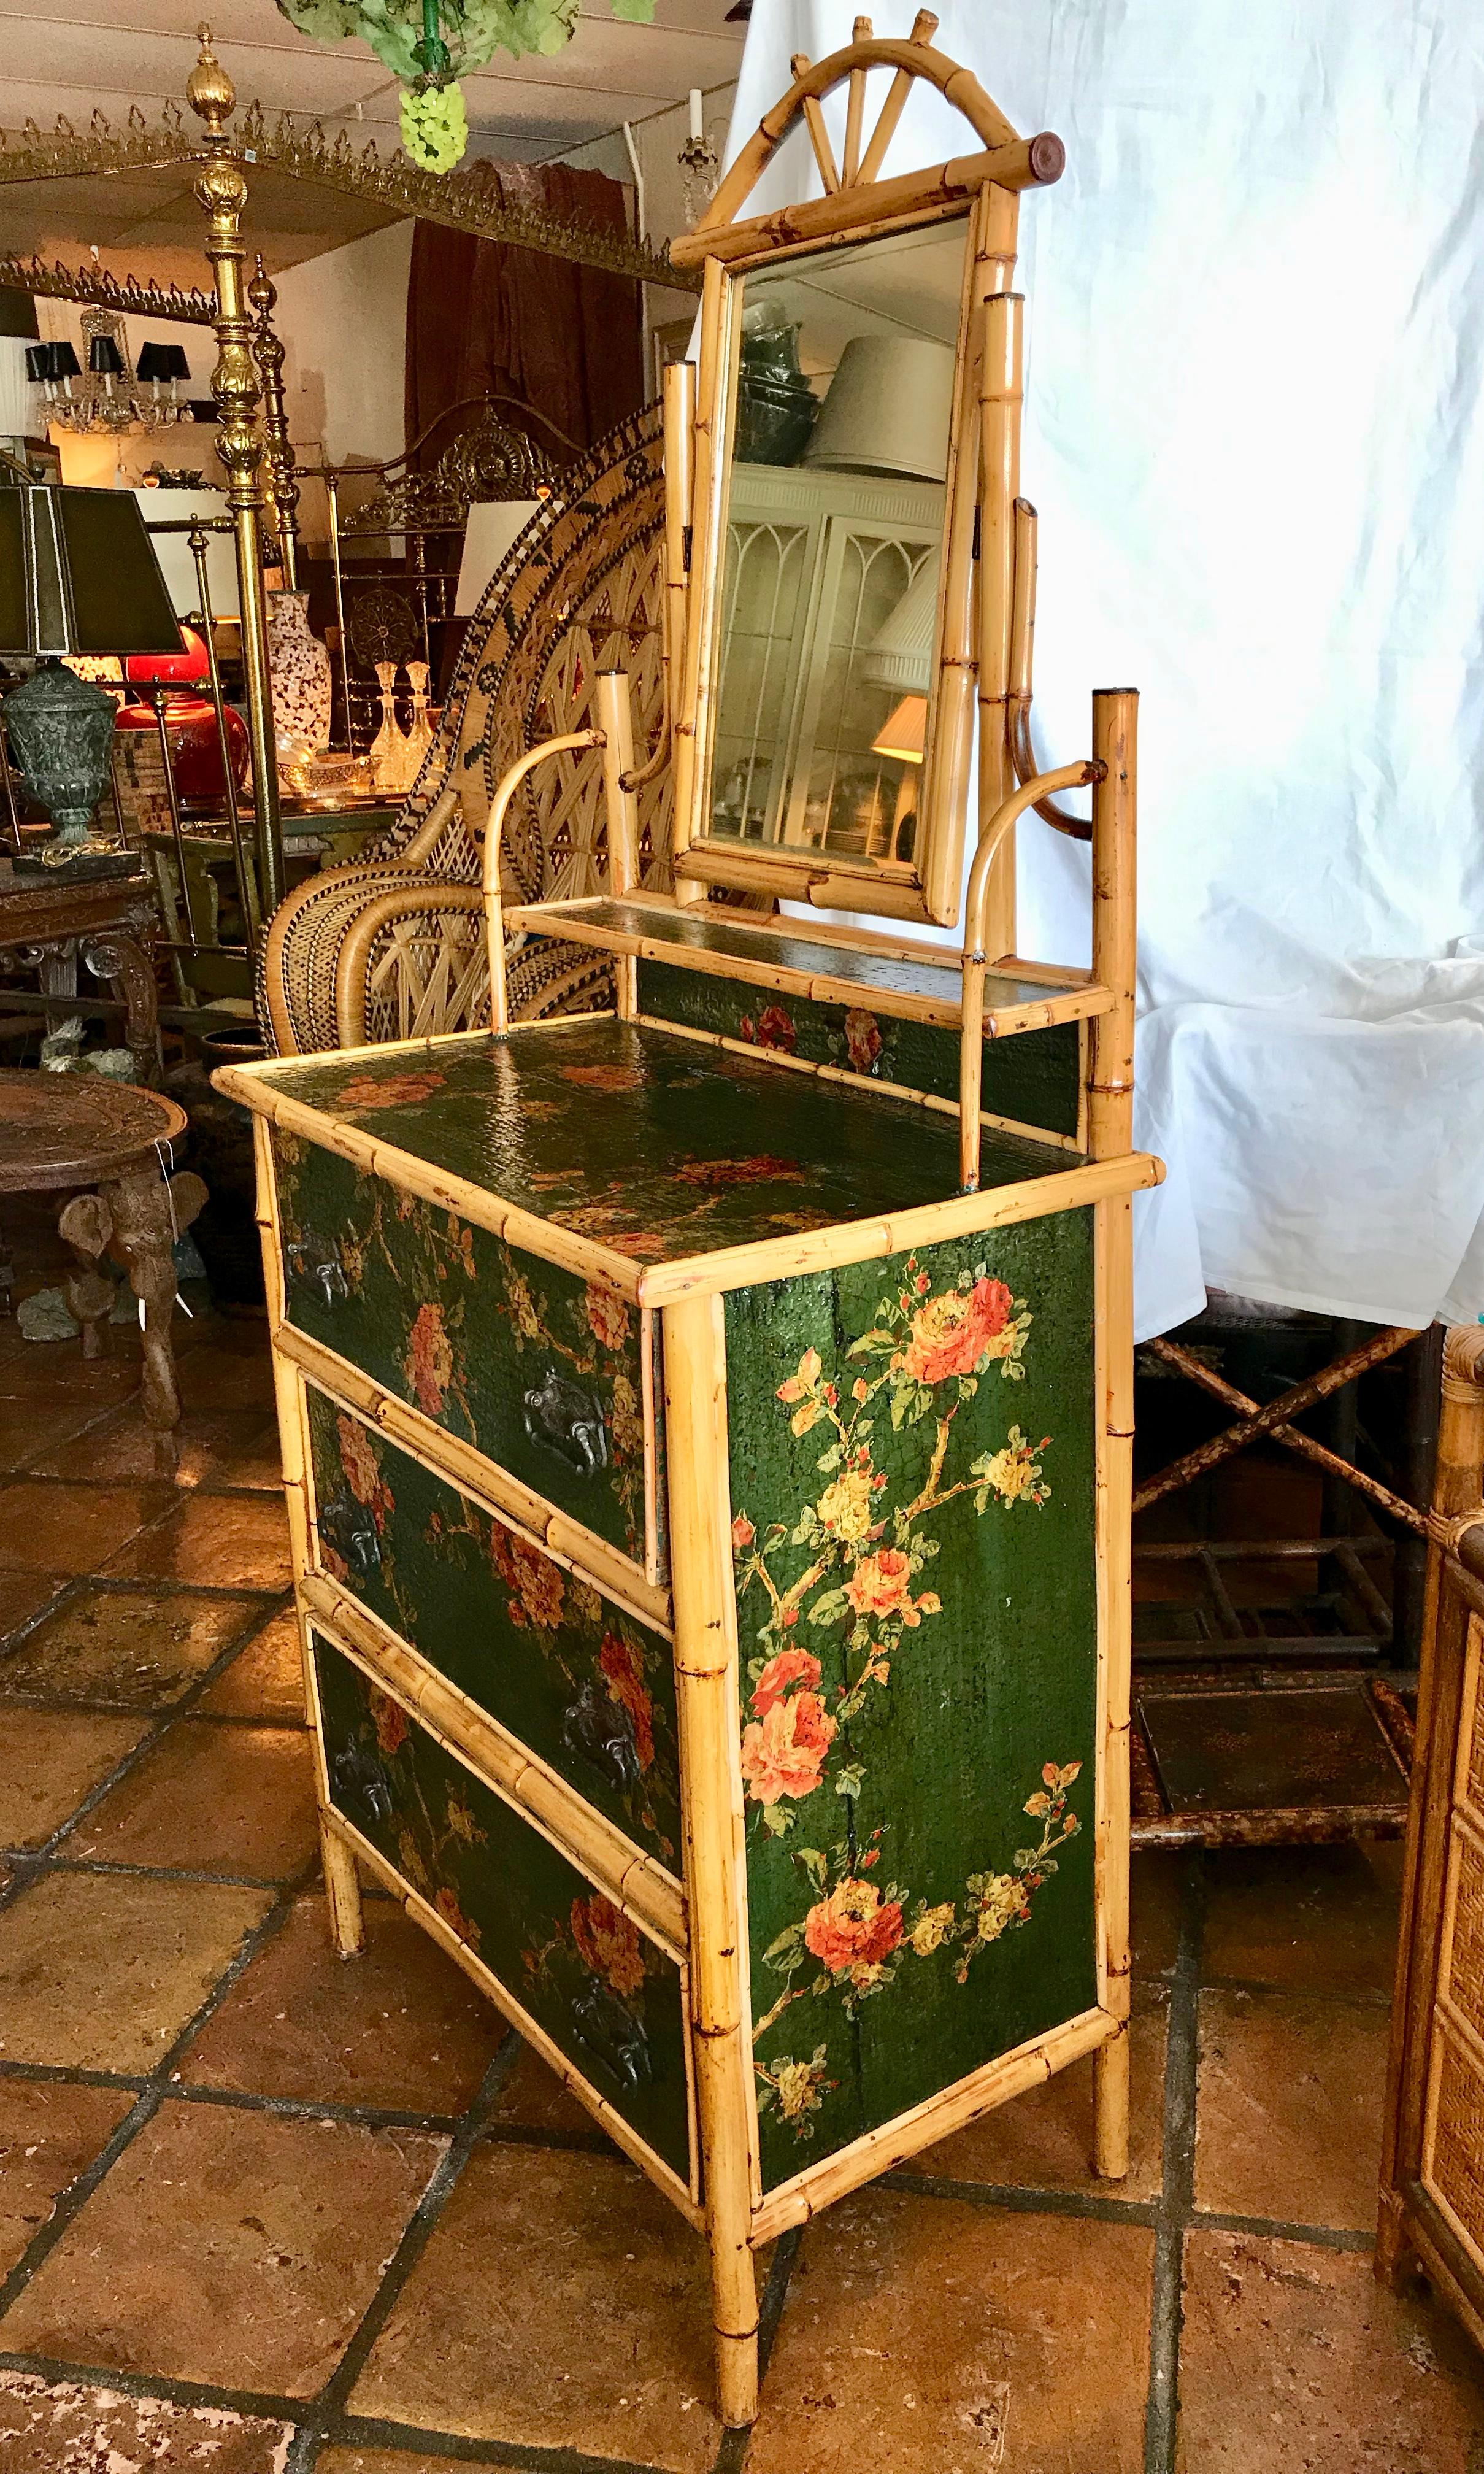 It is a most unusual dresser with an adjustable mirror. The mirror is beveled.
It is fitted with 3 amply proportioned drawers and decorated all over with added decoupage florals.
Beautifully proportioned and designed with good height.